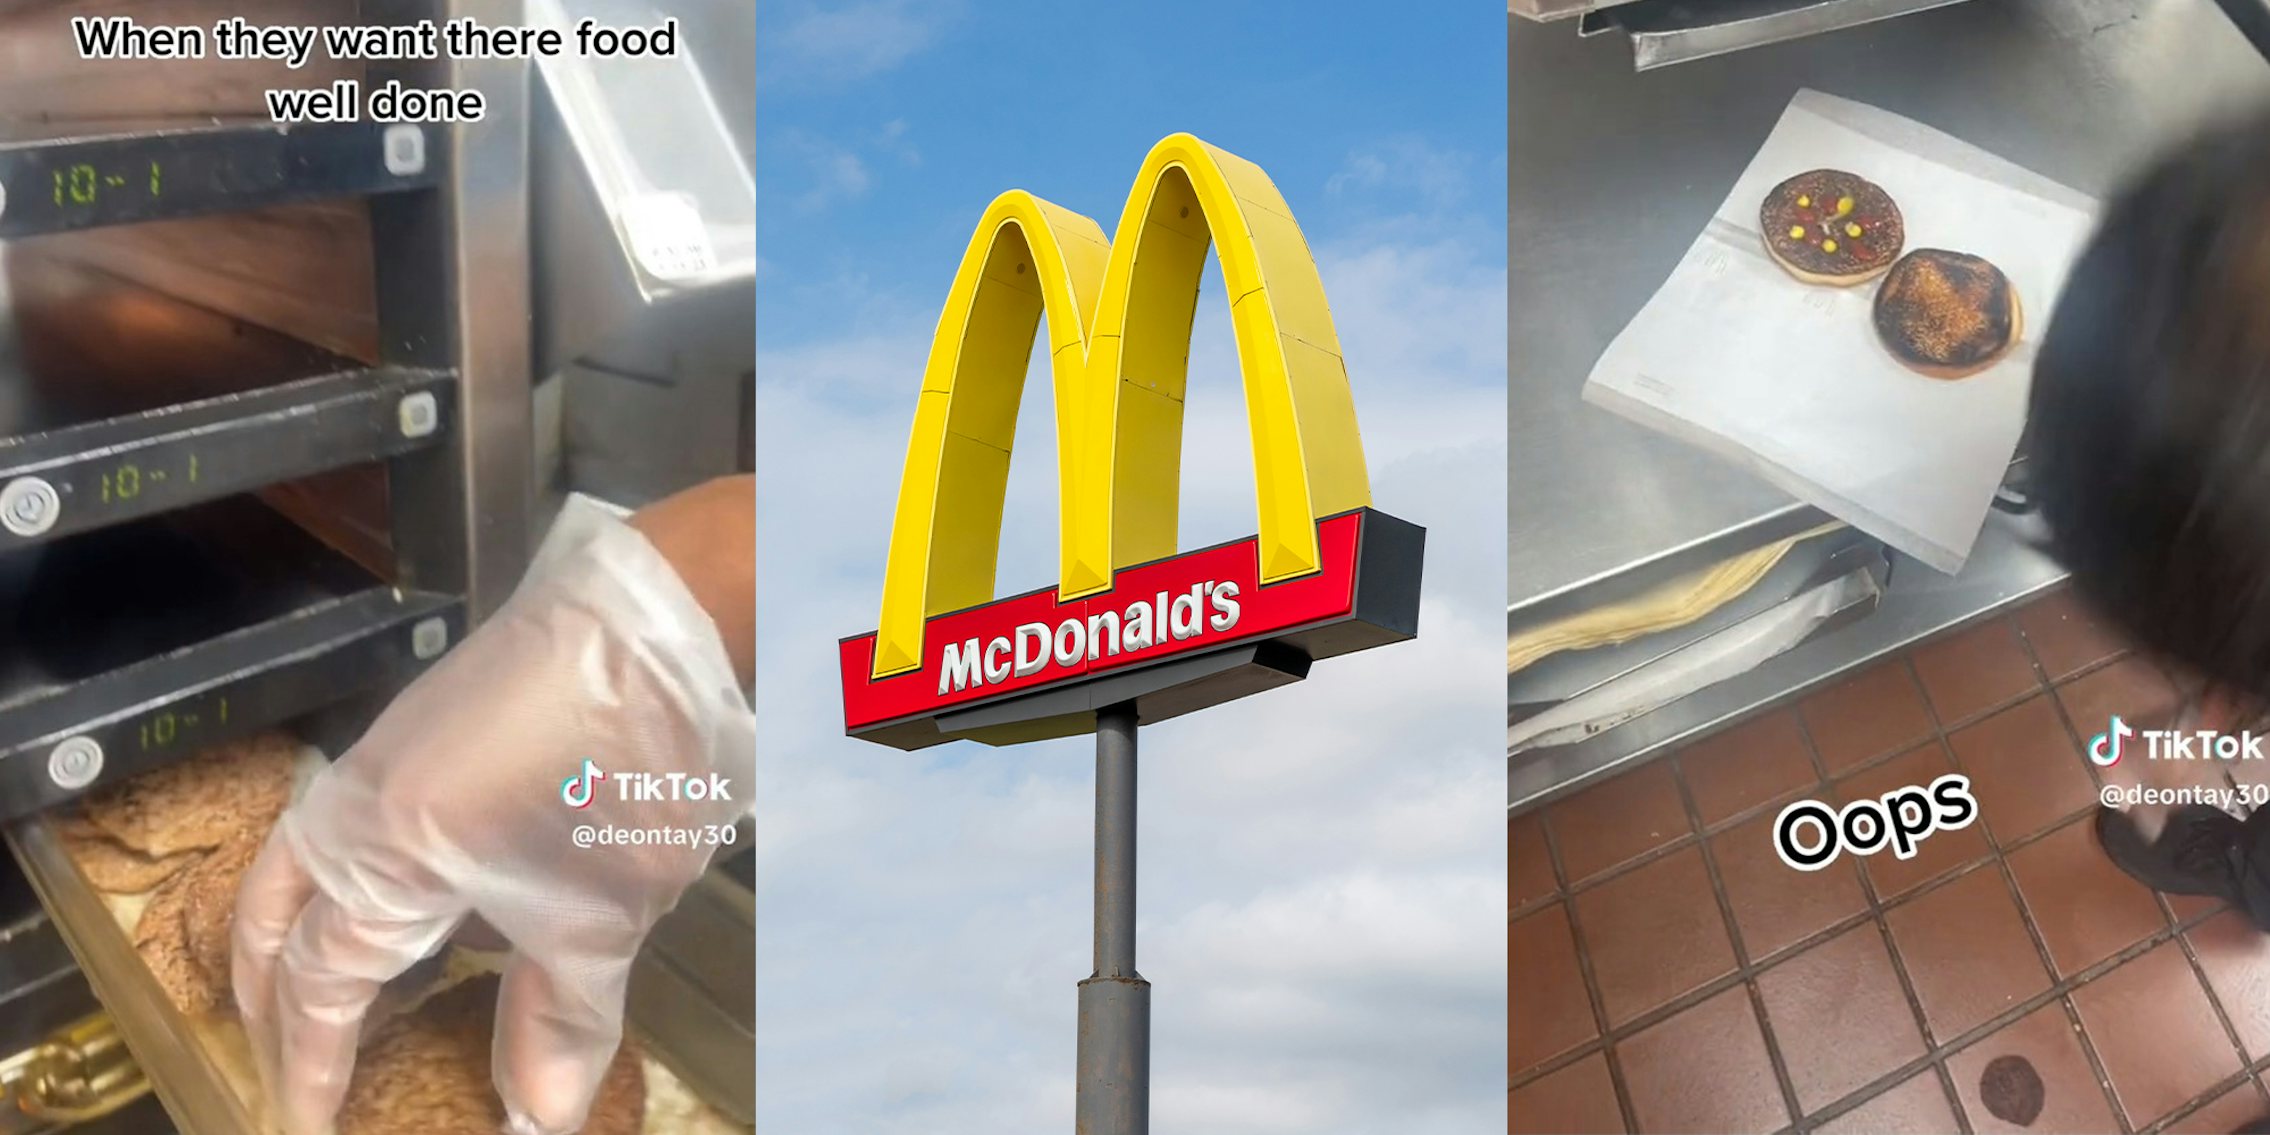 McDonald's worker shares what they do when customer wants 'well-done' burger